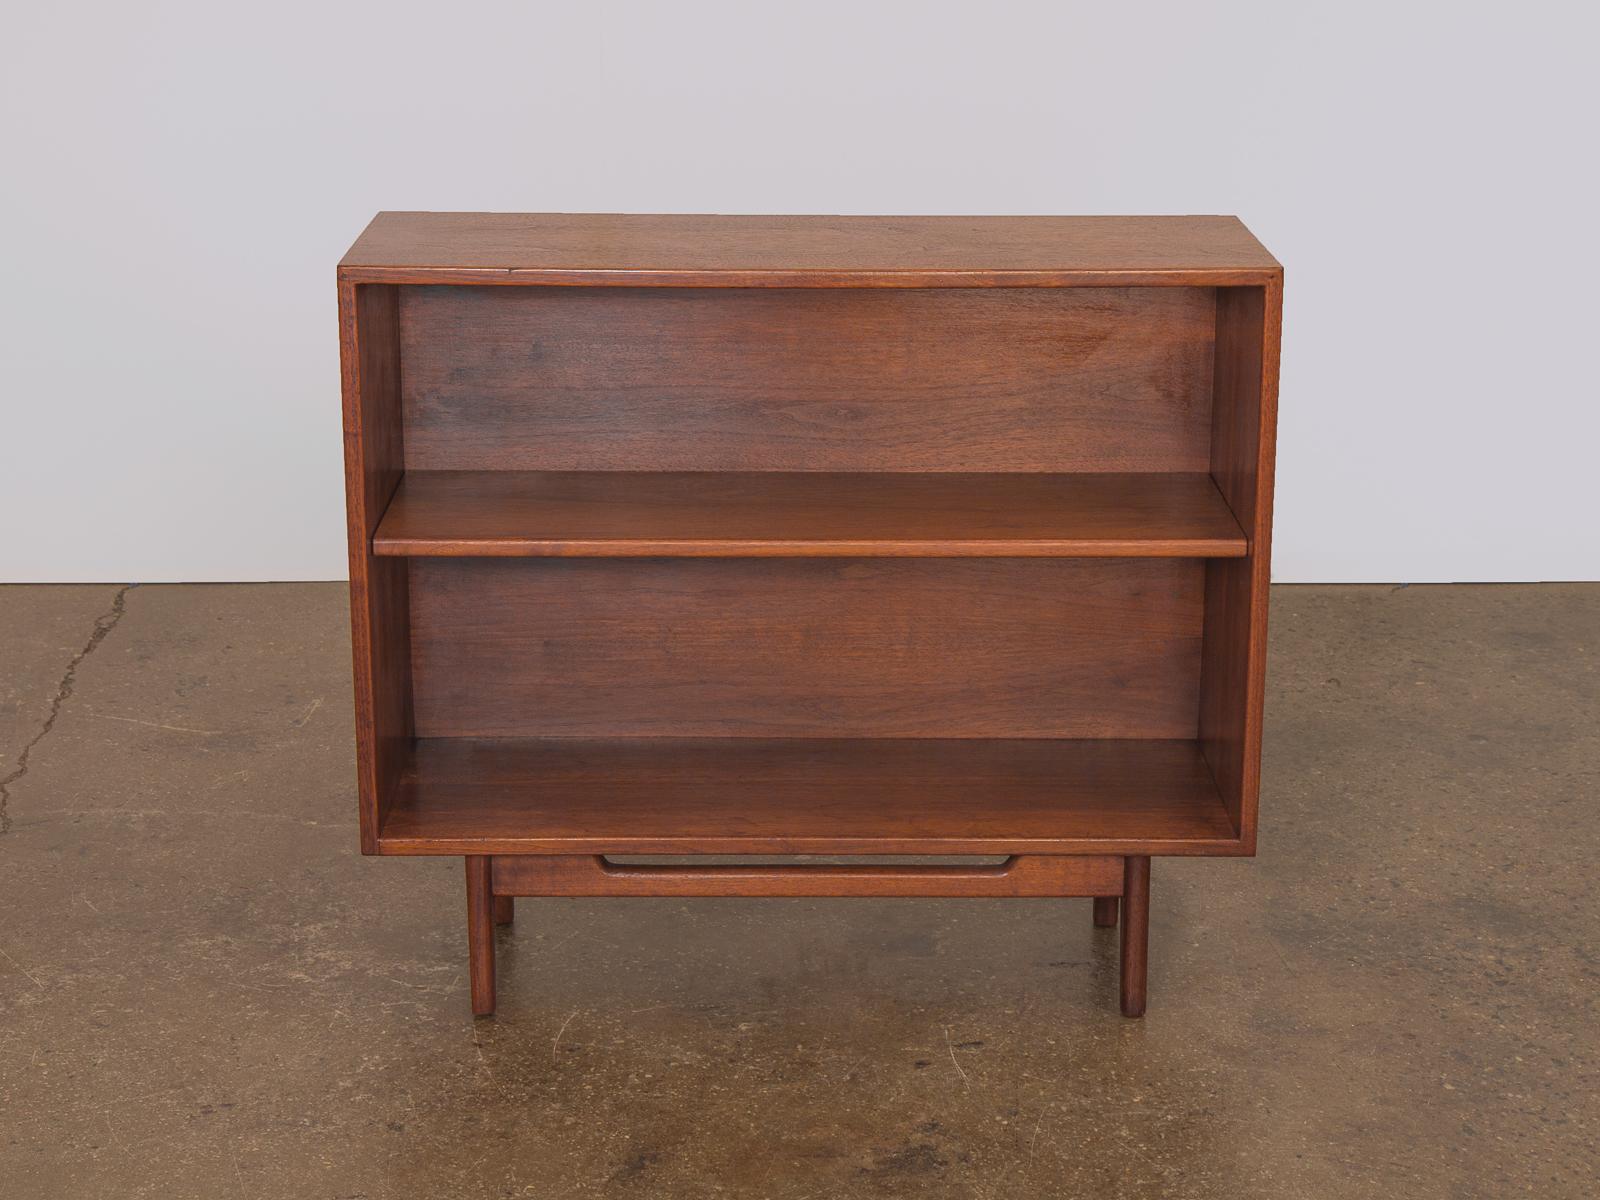 Gorgeous walnut bookcase by Danish American designer Jens Risom. Its sturdy, functional design is paired with a rich and vibrant wood grain. The bookcase is in excellent condition featuring an elegant patina, height adjustable shelf and the